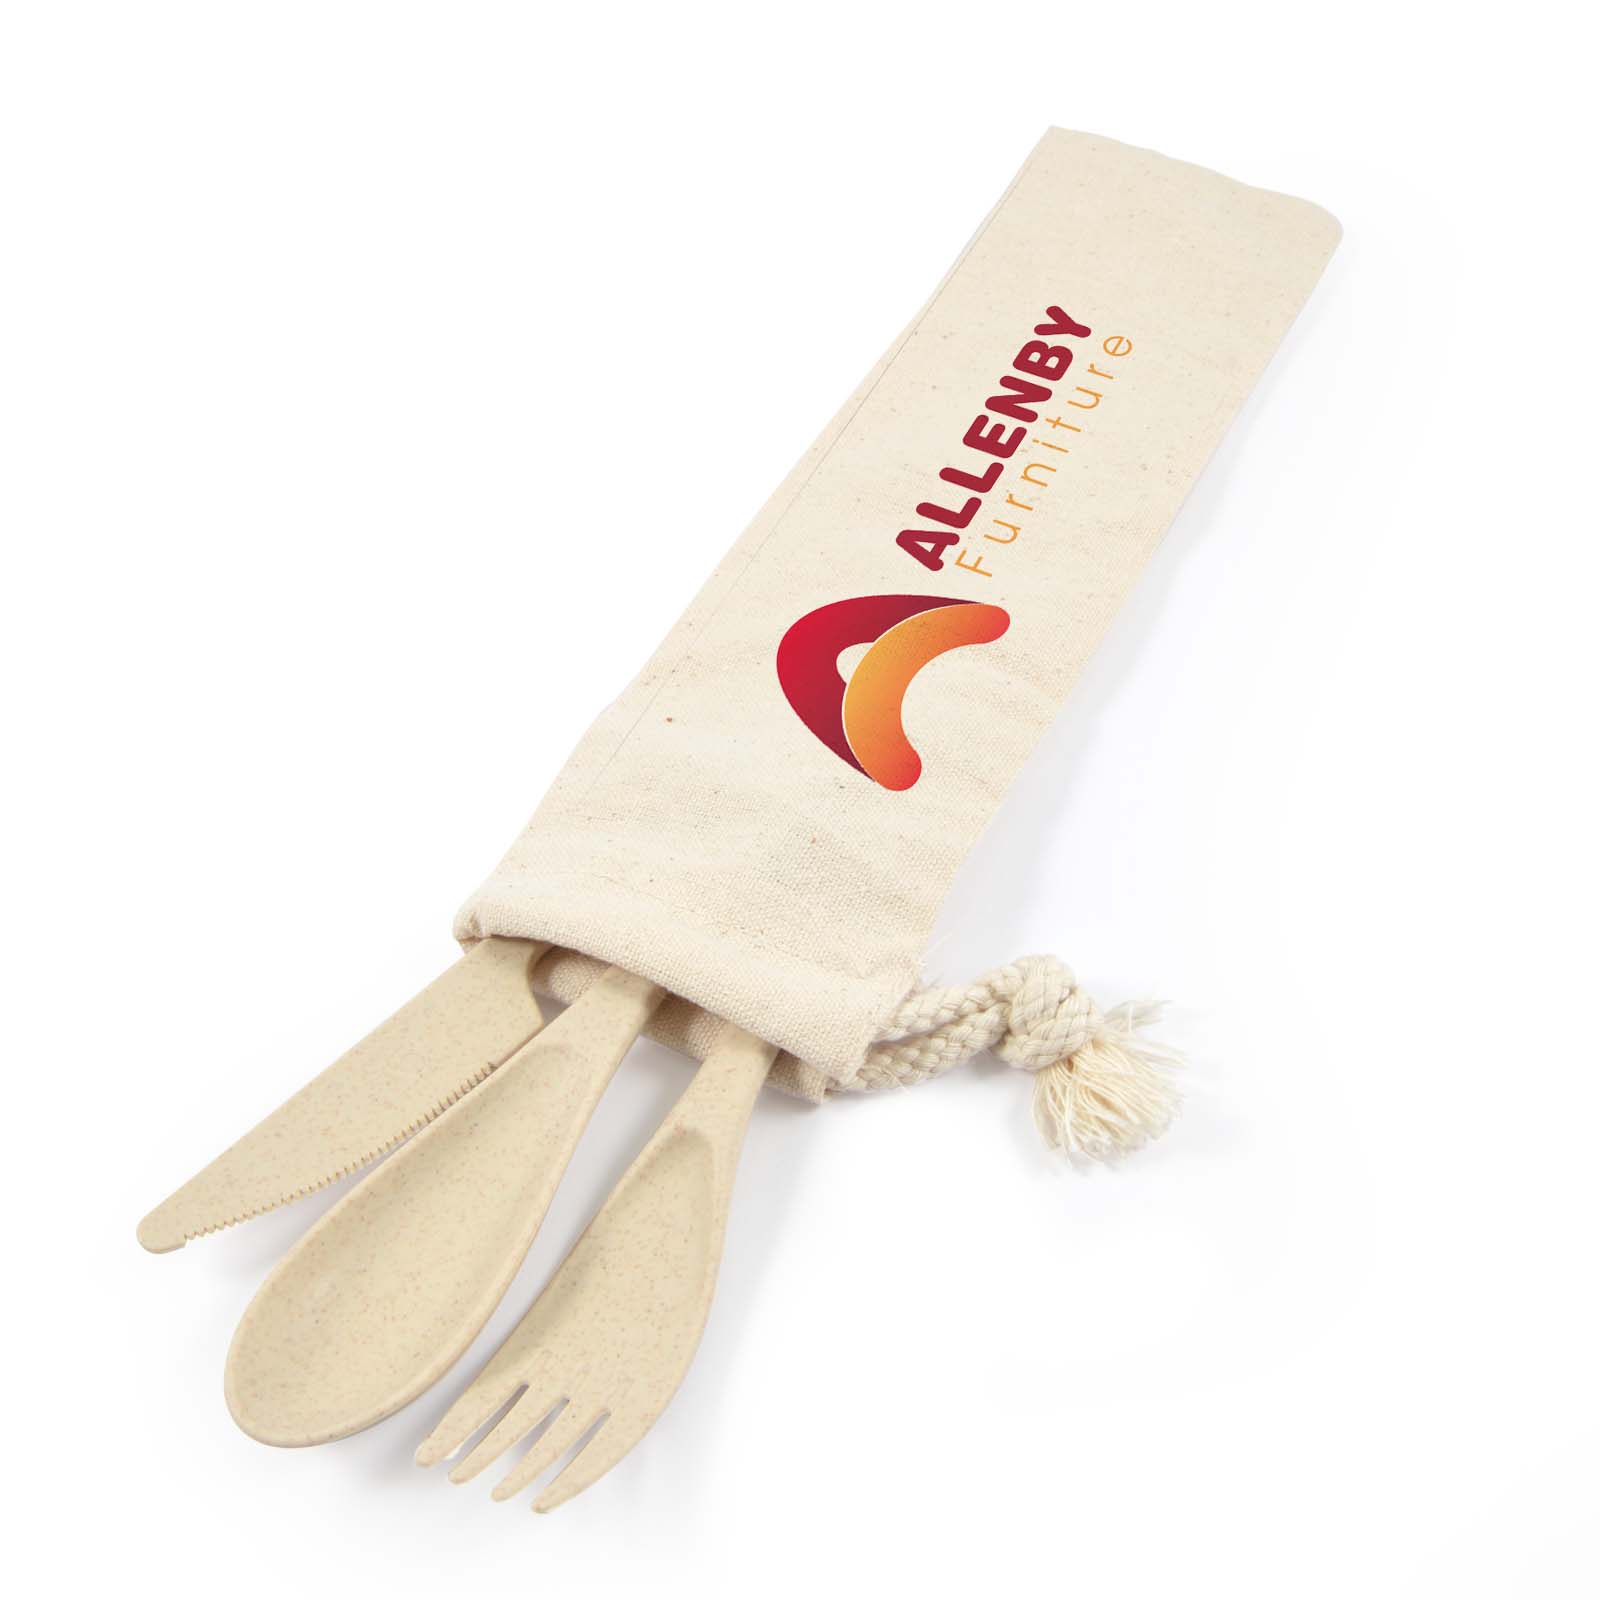 LL8790 - Delish Eco Cutlery Set in Calico Pouch